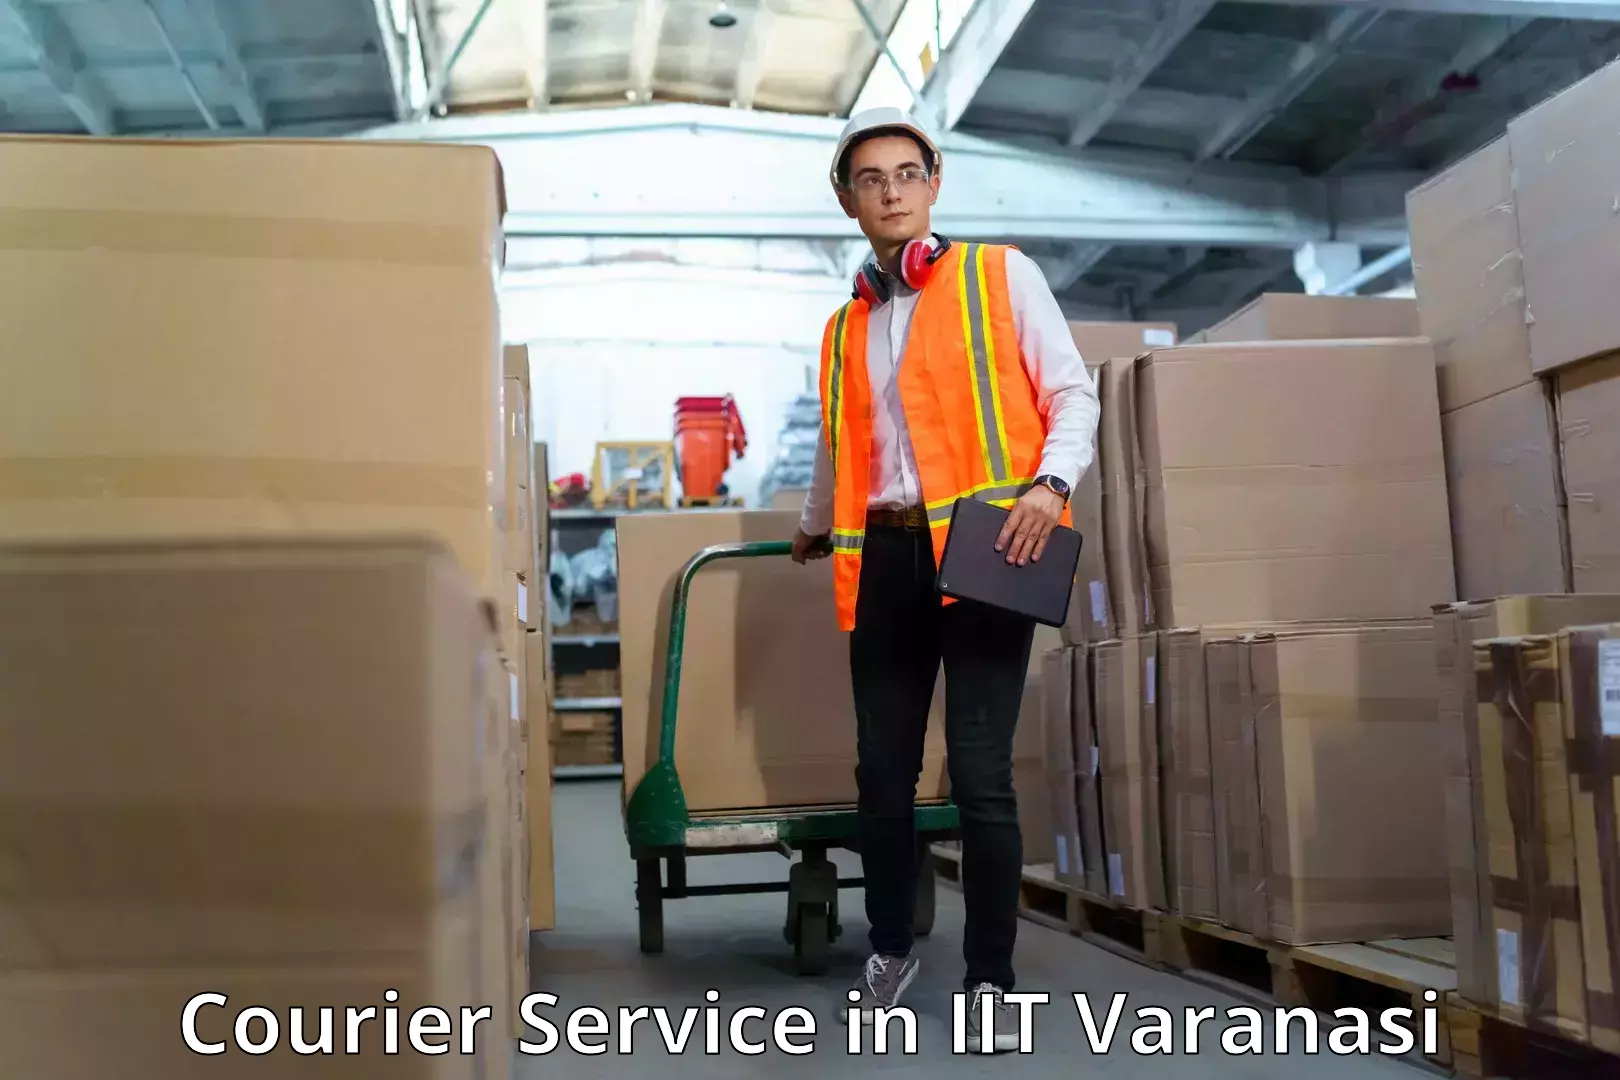 State-of-the-art courier technology in IIT Varanasi